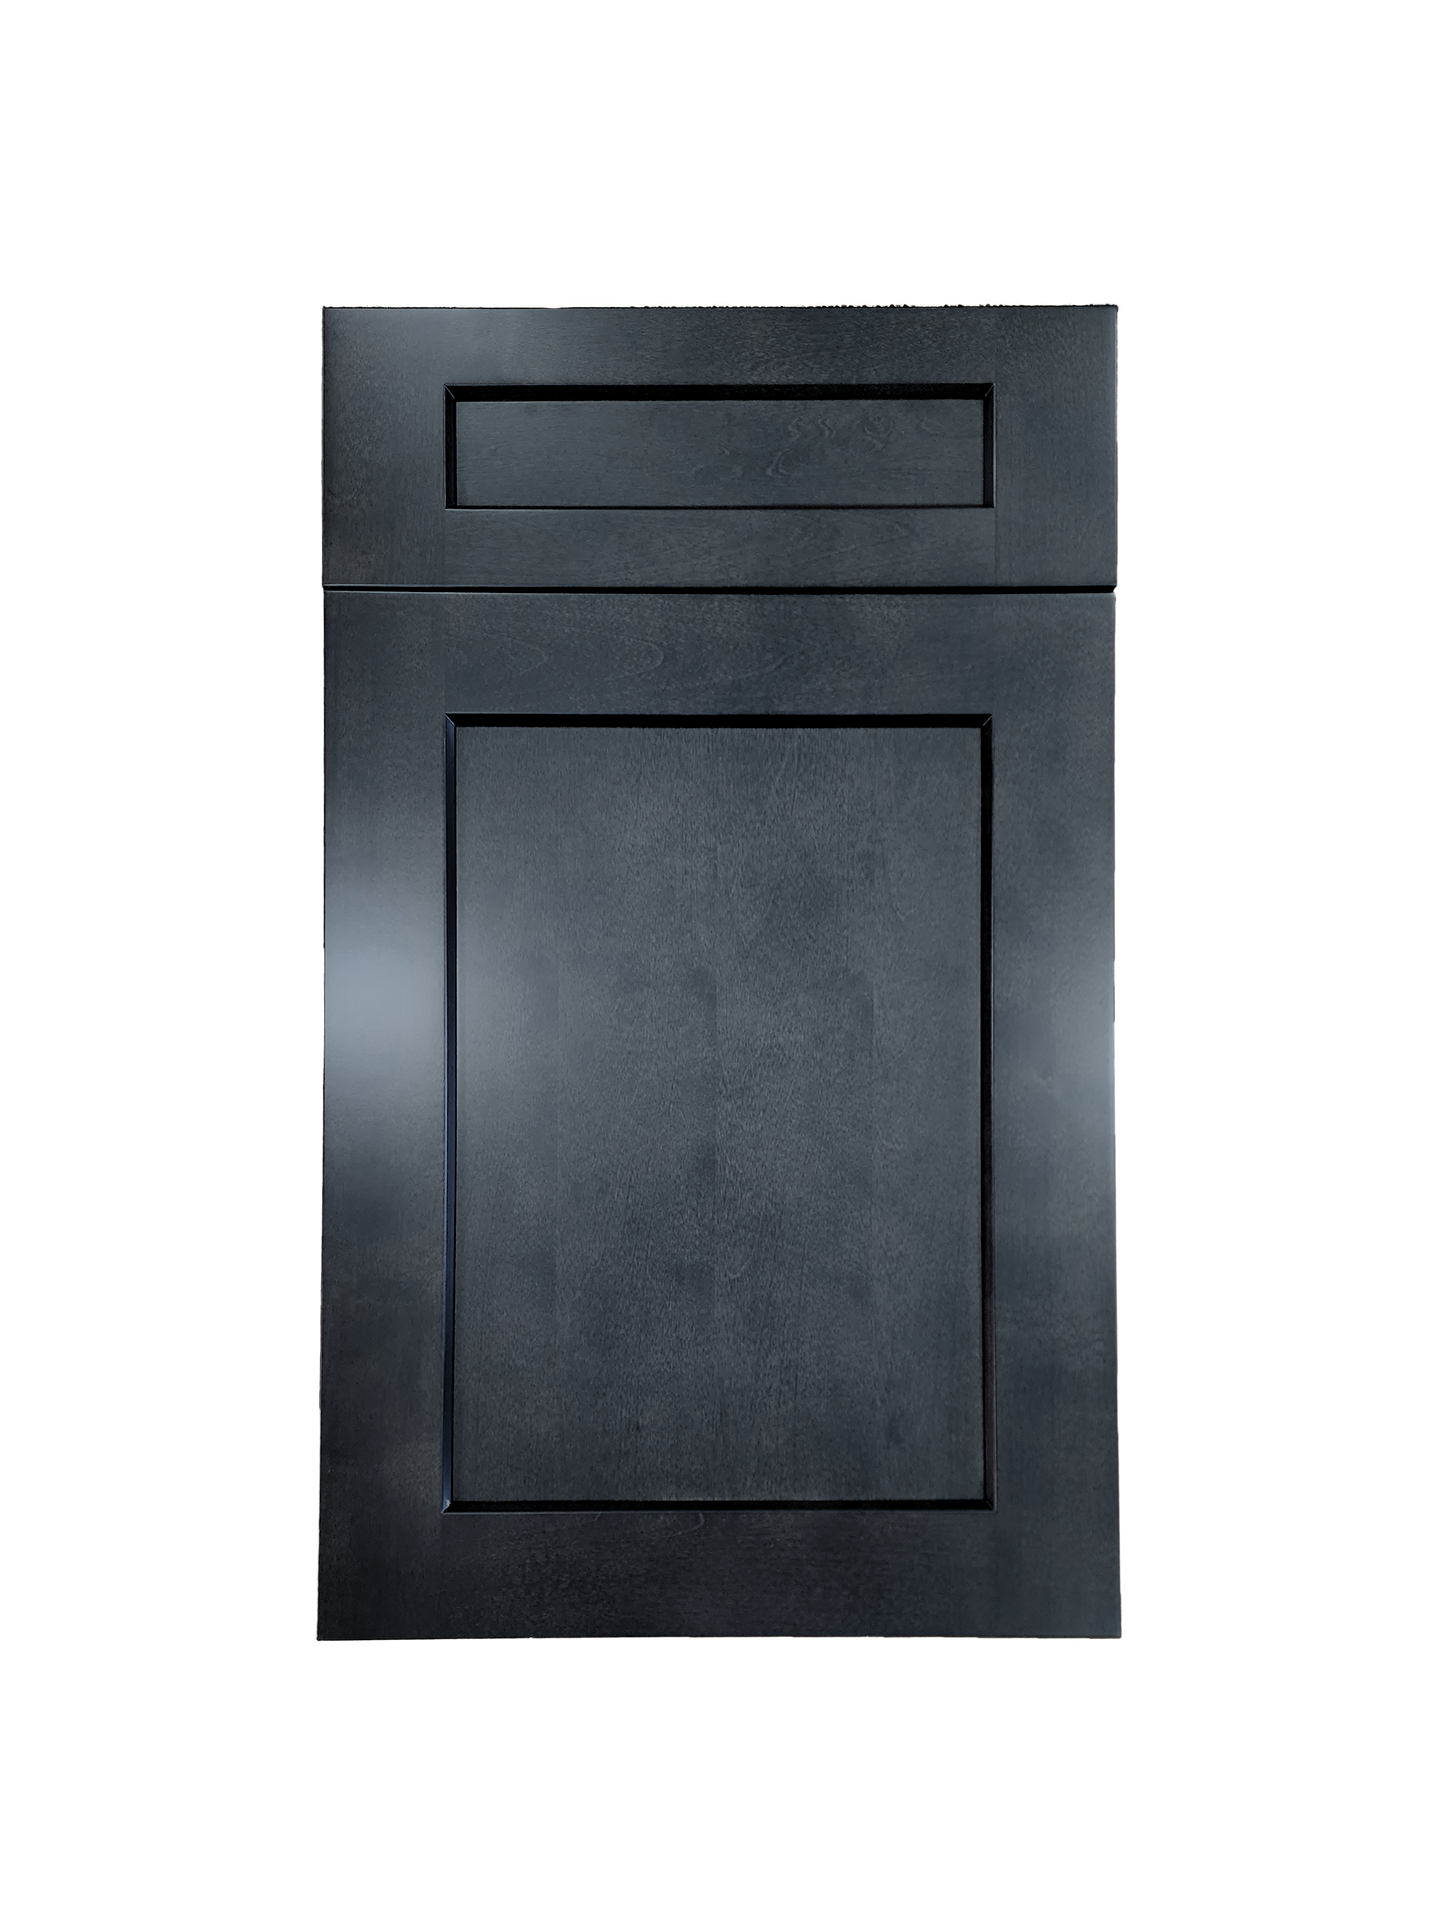 Stormy Grey Wall Cabinet 36 inches wide 12 inches deep 18 inches tall with Stormy Grey box and Stormy Grey doors